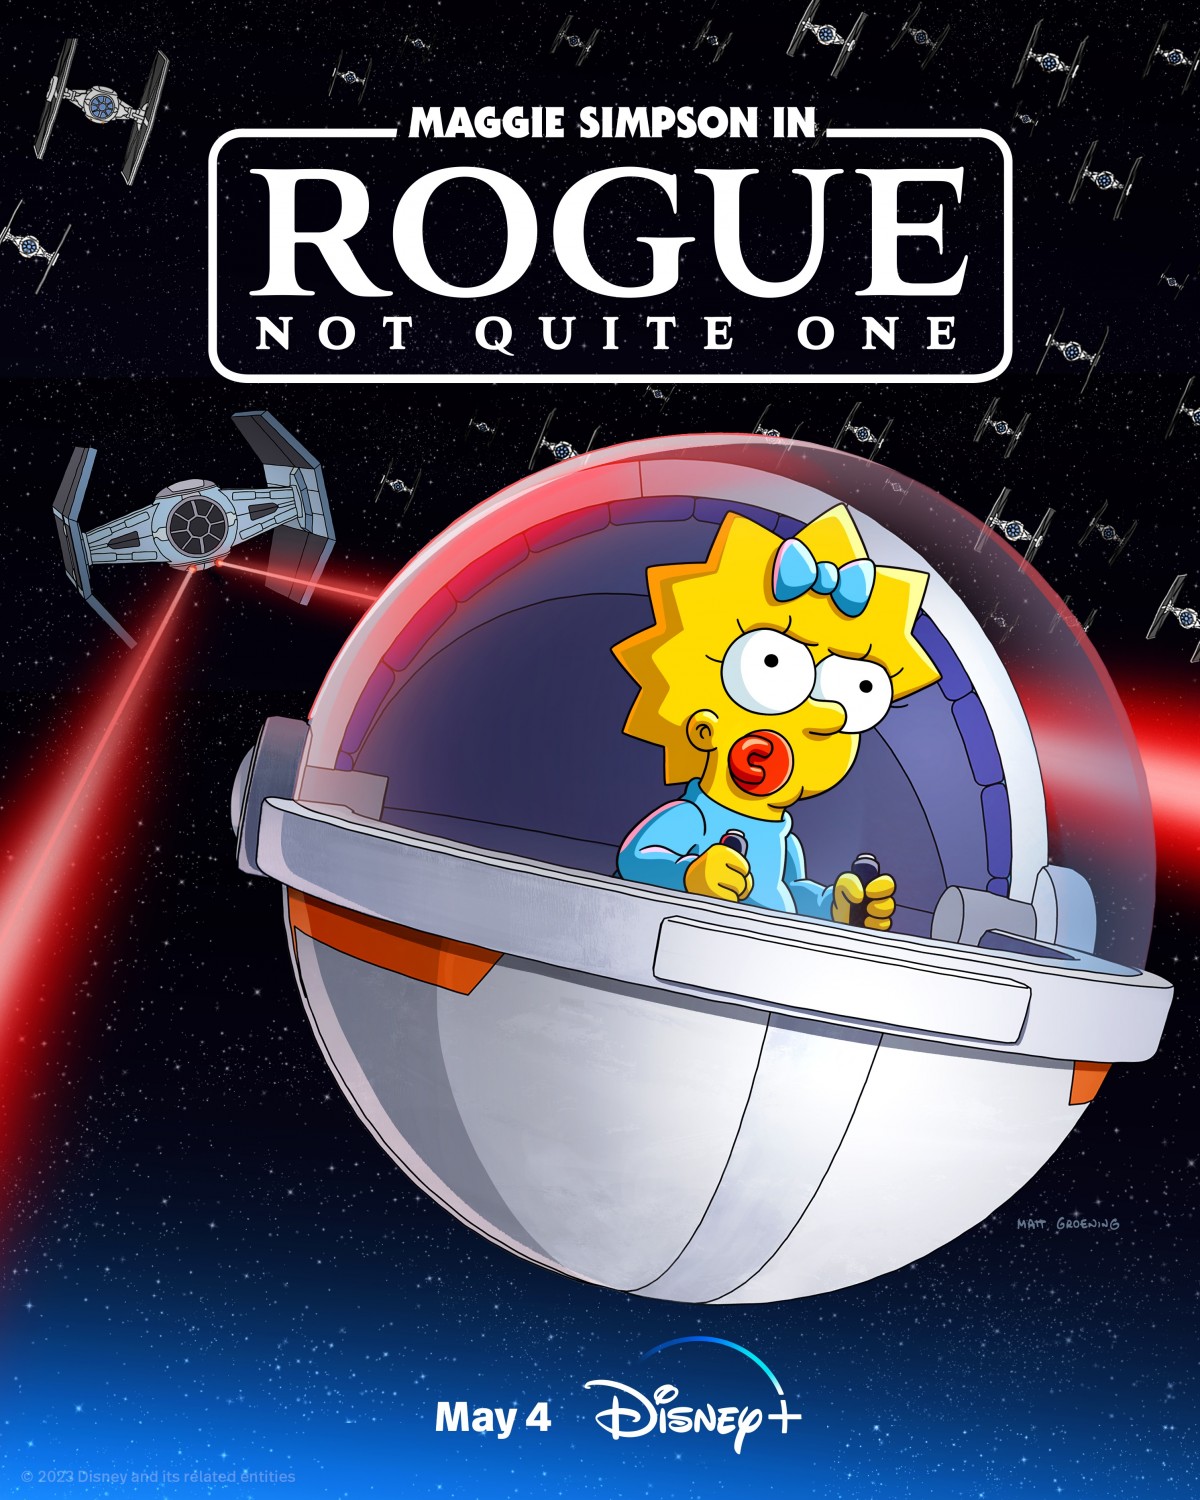 Extra Large Movie Poster Image for Maggie Simpson in Rogue Not Quite One